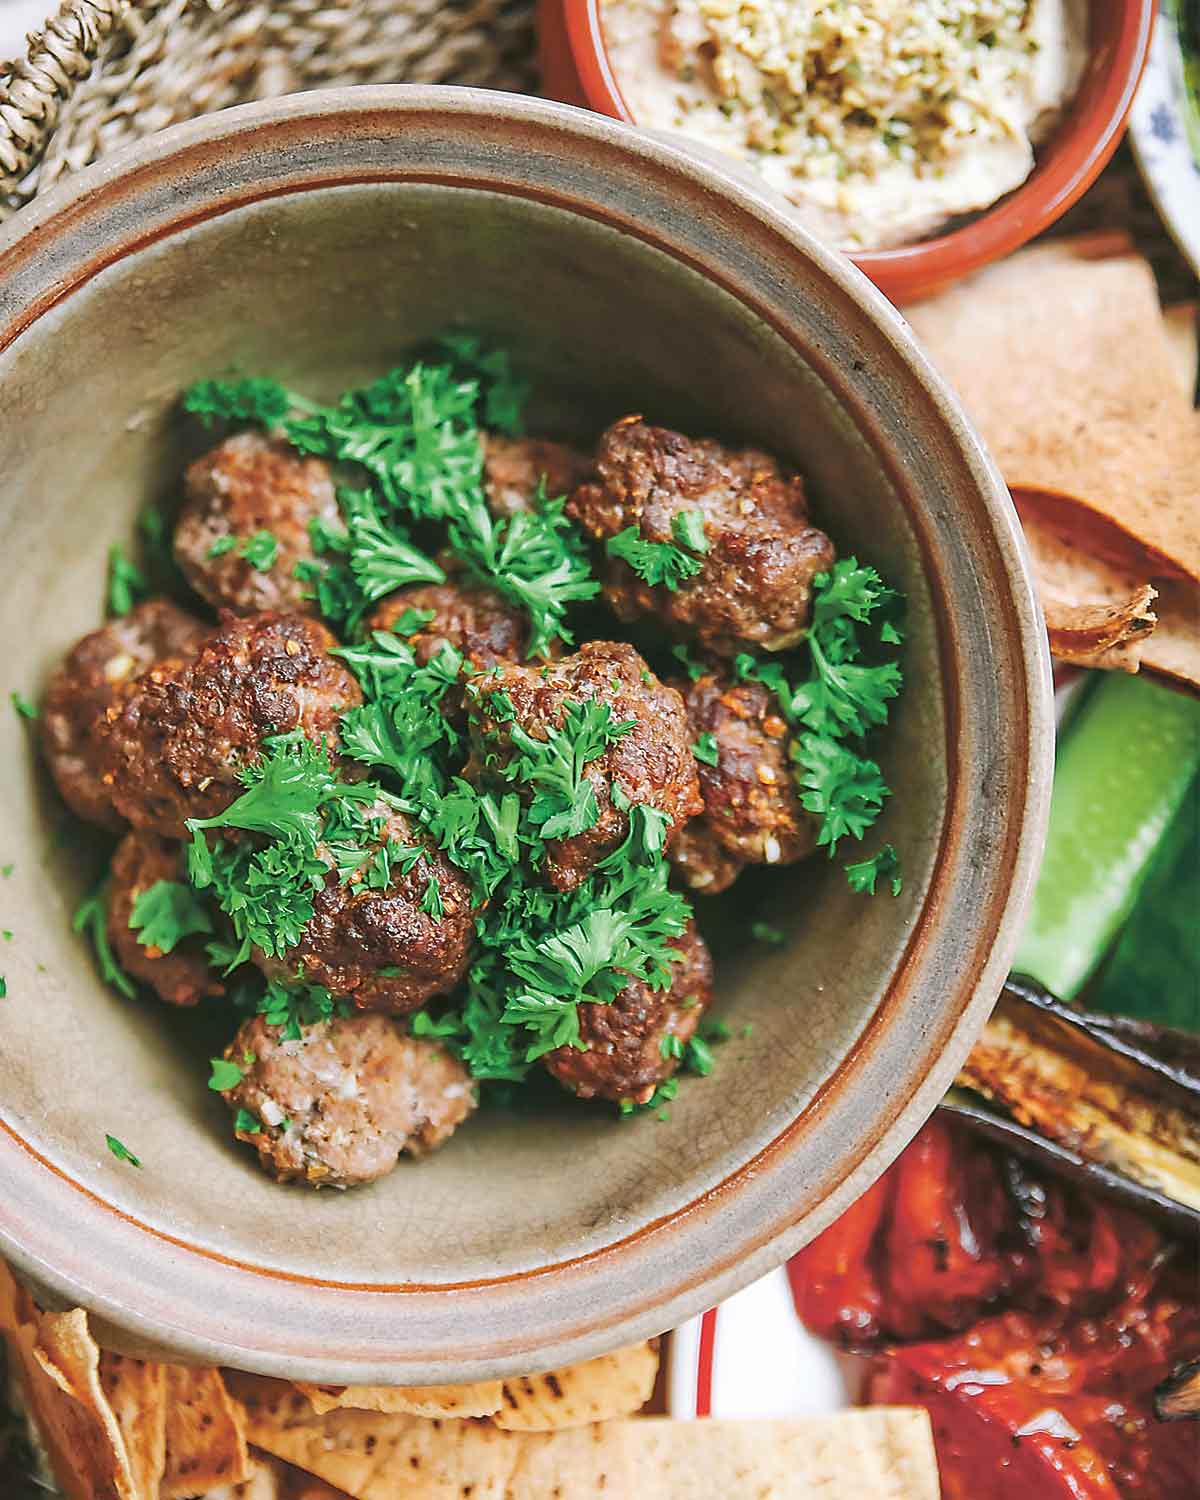 A pottery bowl filled with merguez meatballs, garnished with parsley, surrounded by pitas, hummus, and roasted red peppers.